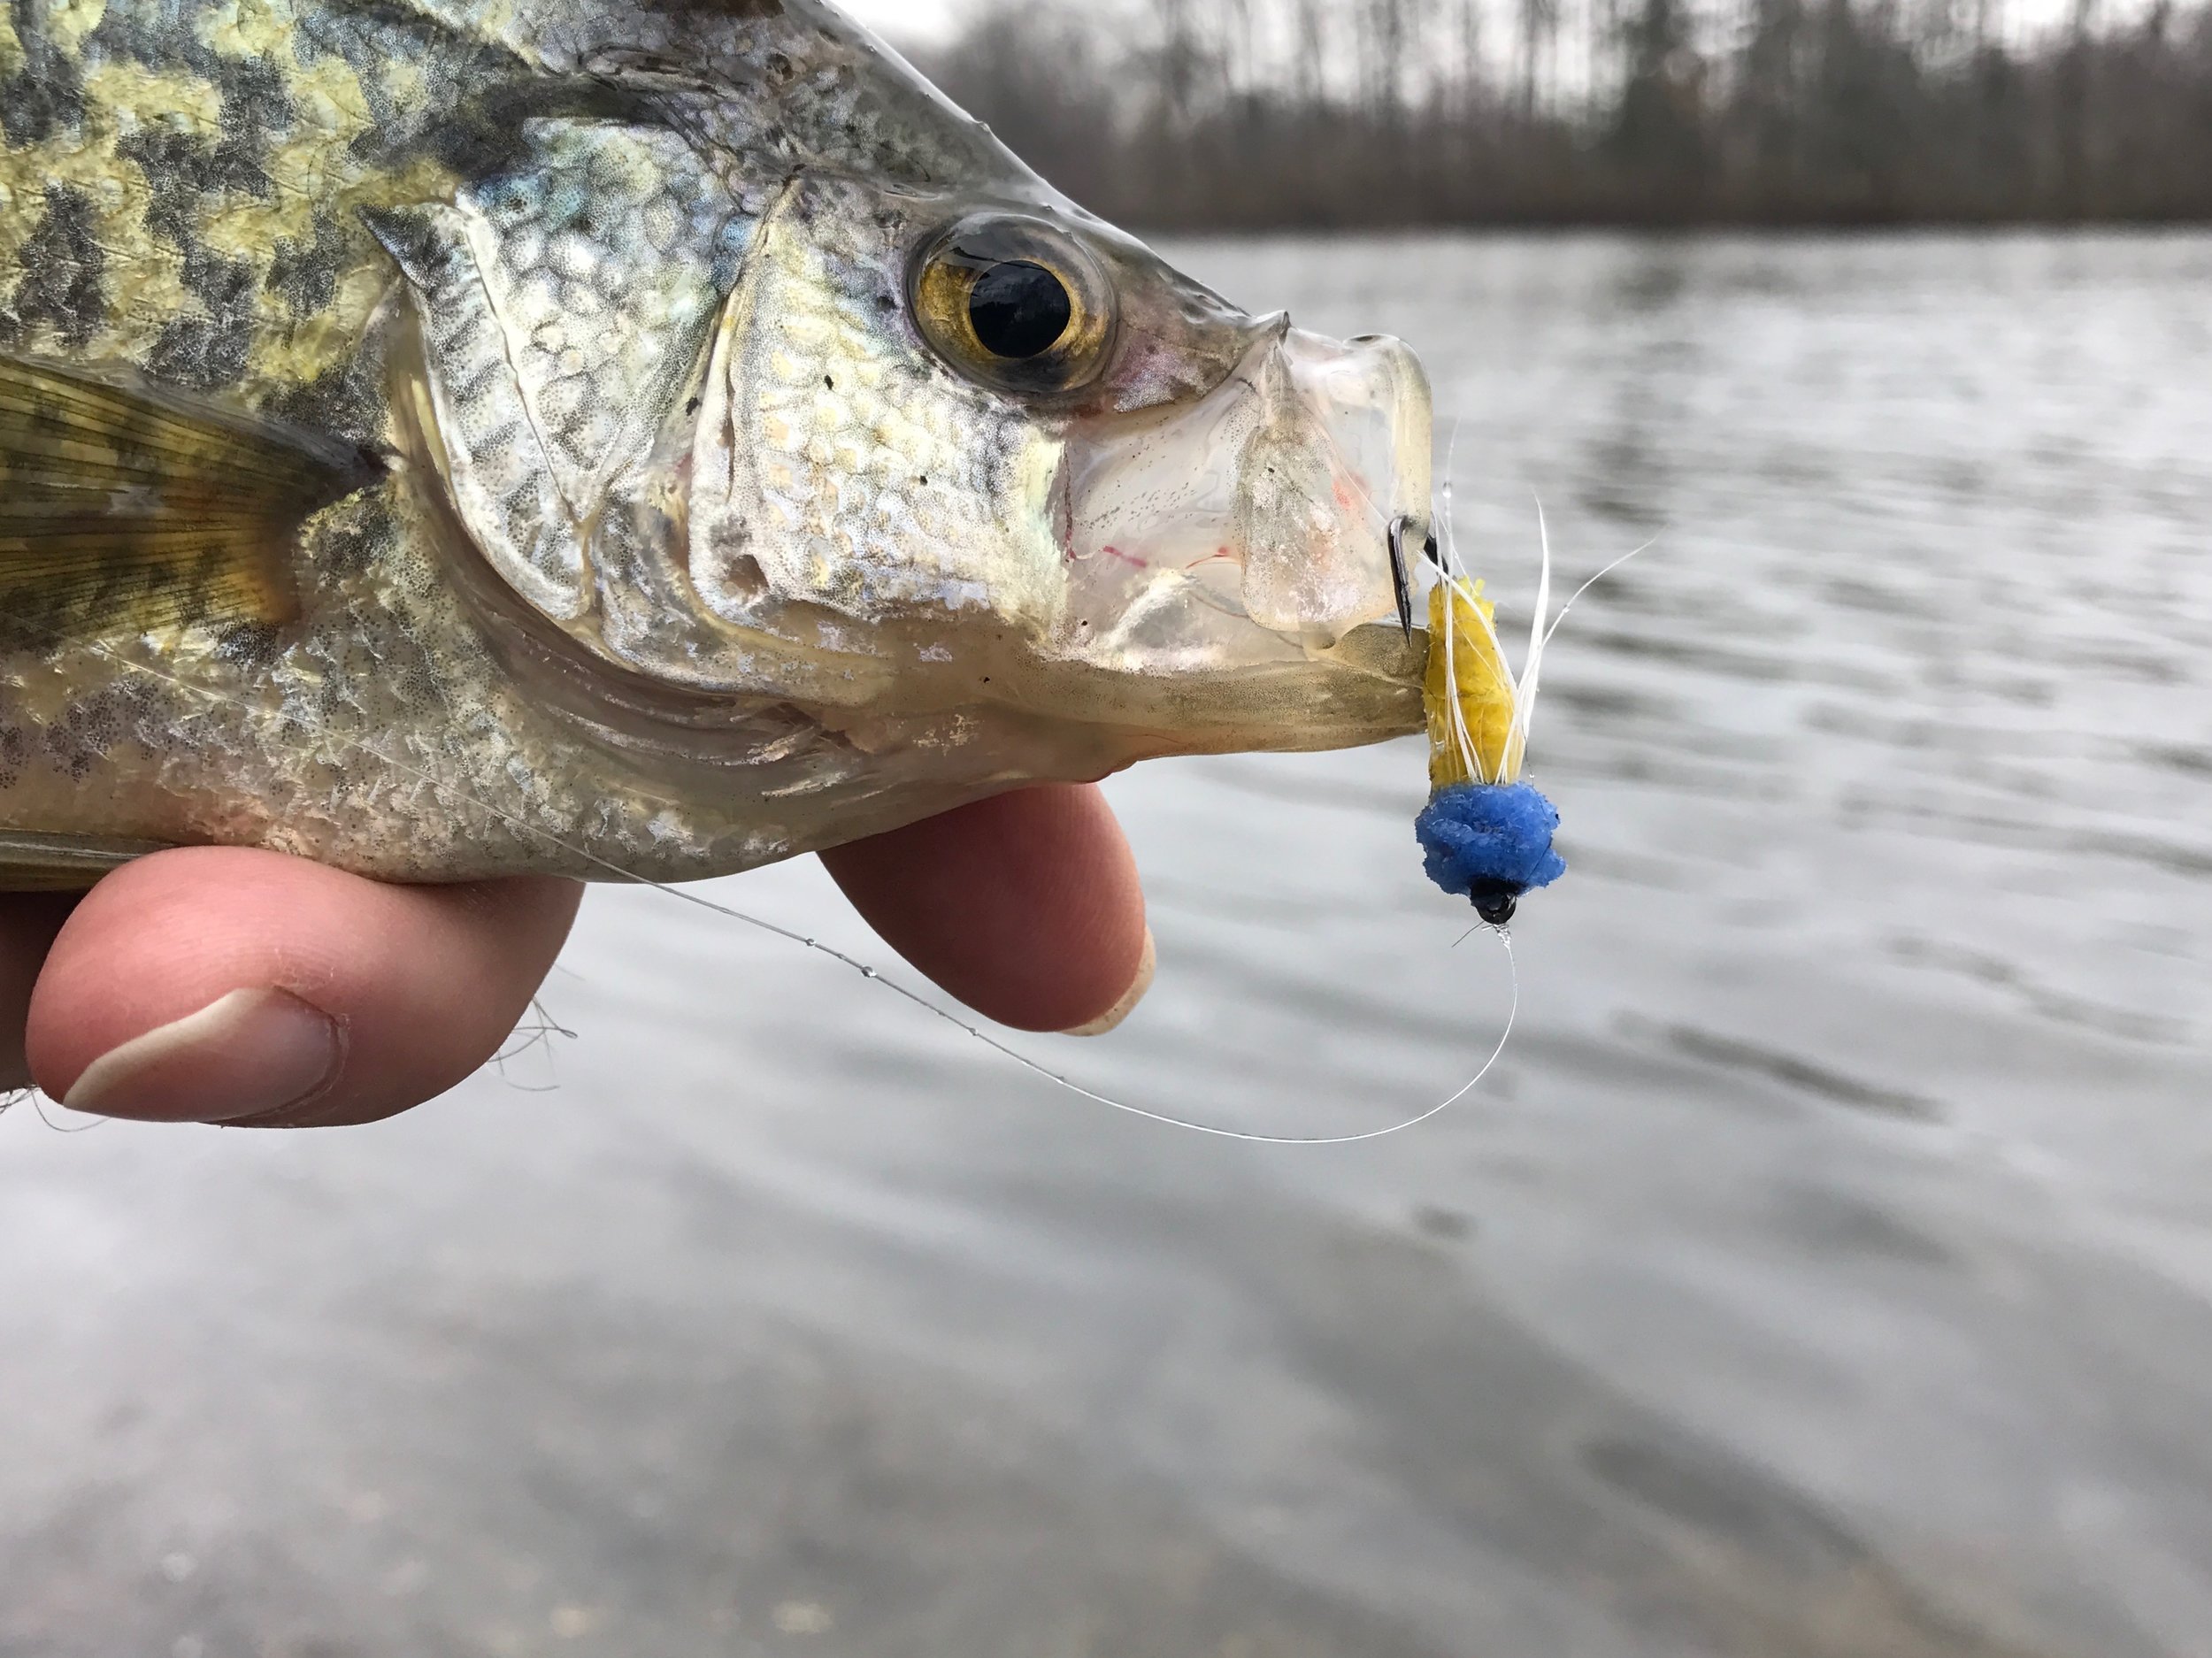 How to Find the Best Crappie Fishing this Spring